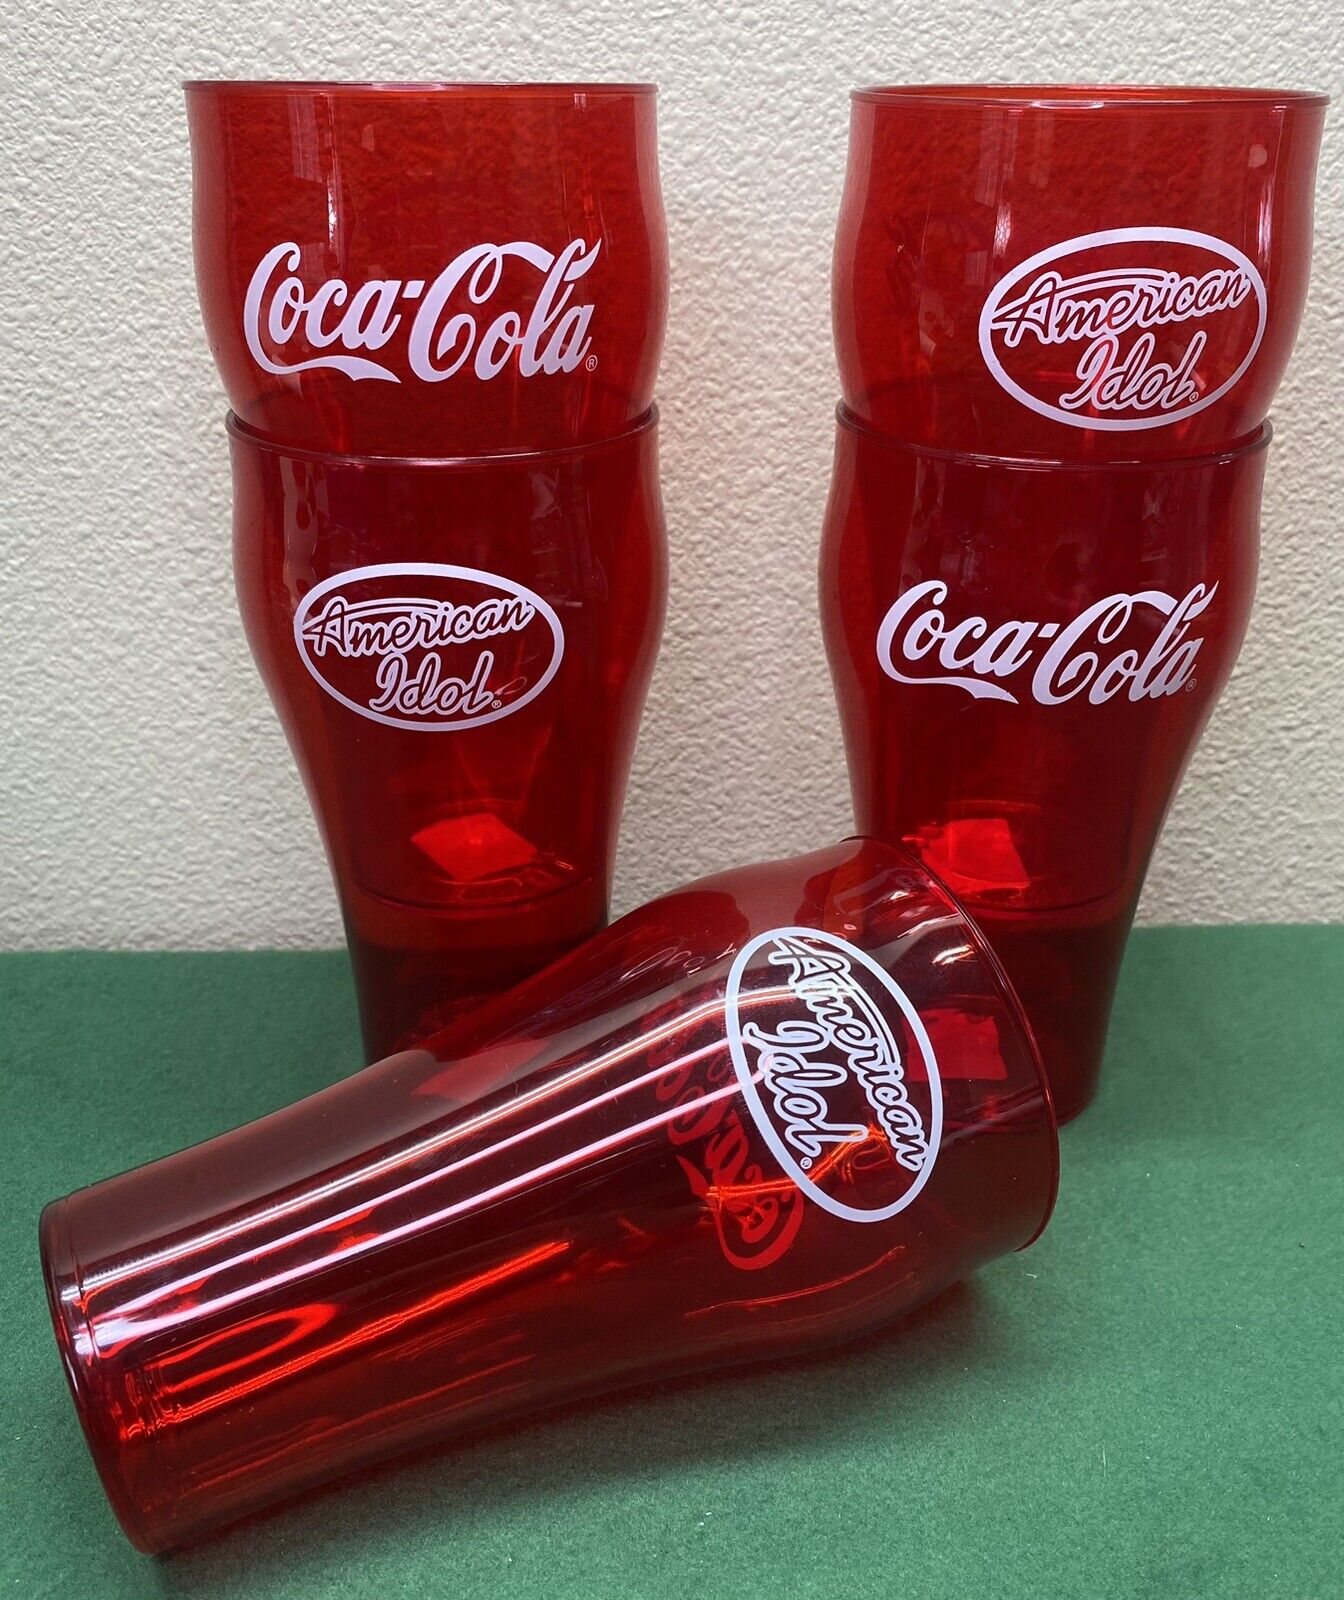 LOT of 5 Coca-Cola American Idol Red Dixie Plastic Cups 16oz Promotional